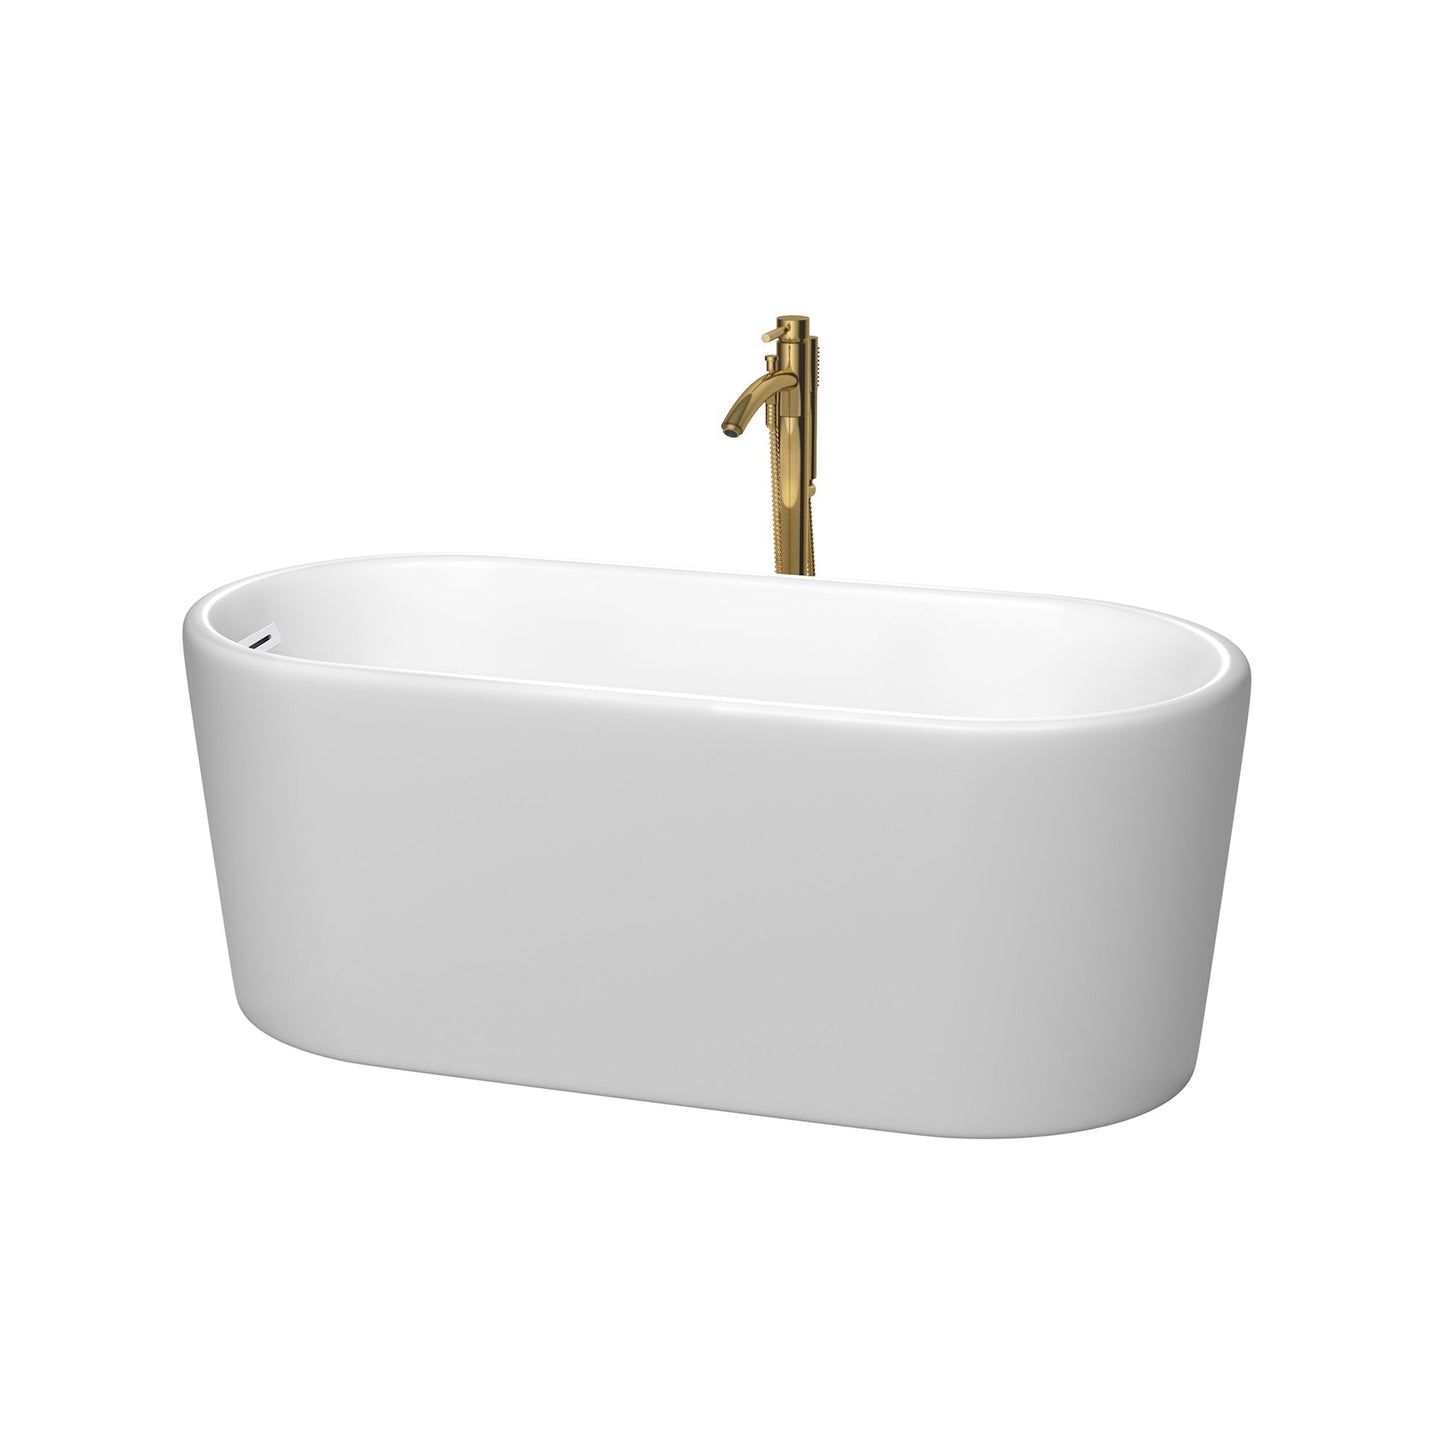 Wyndham Collection Ursula 59" Freestanding Bathtub in Matte White With Shiny White Trim and Floor Mounted Faucet in Brushed Gold